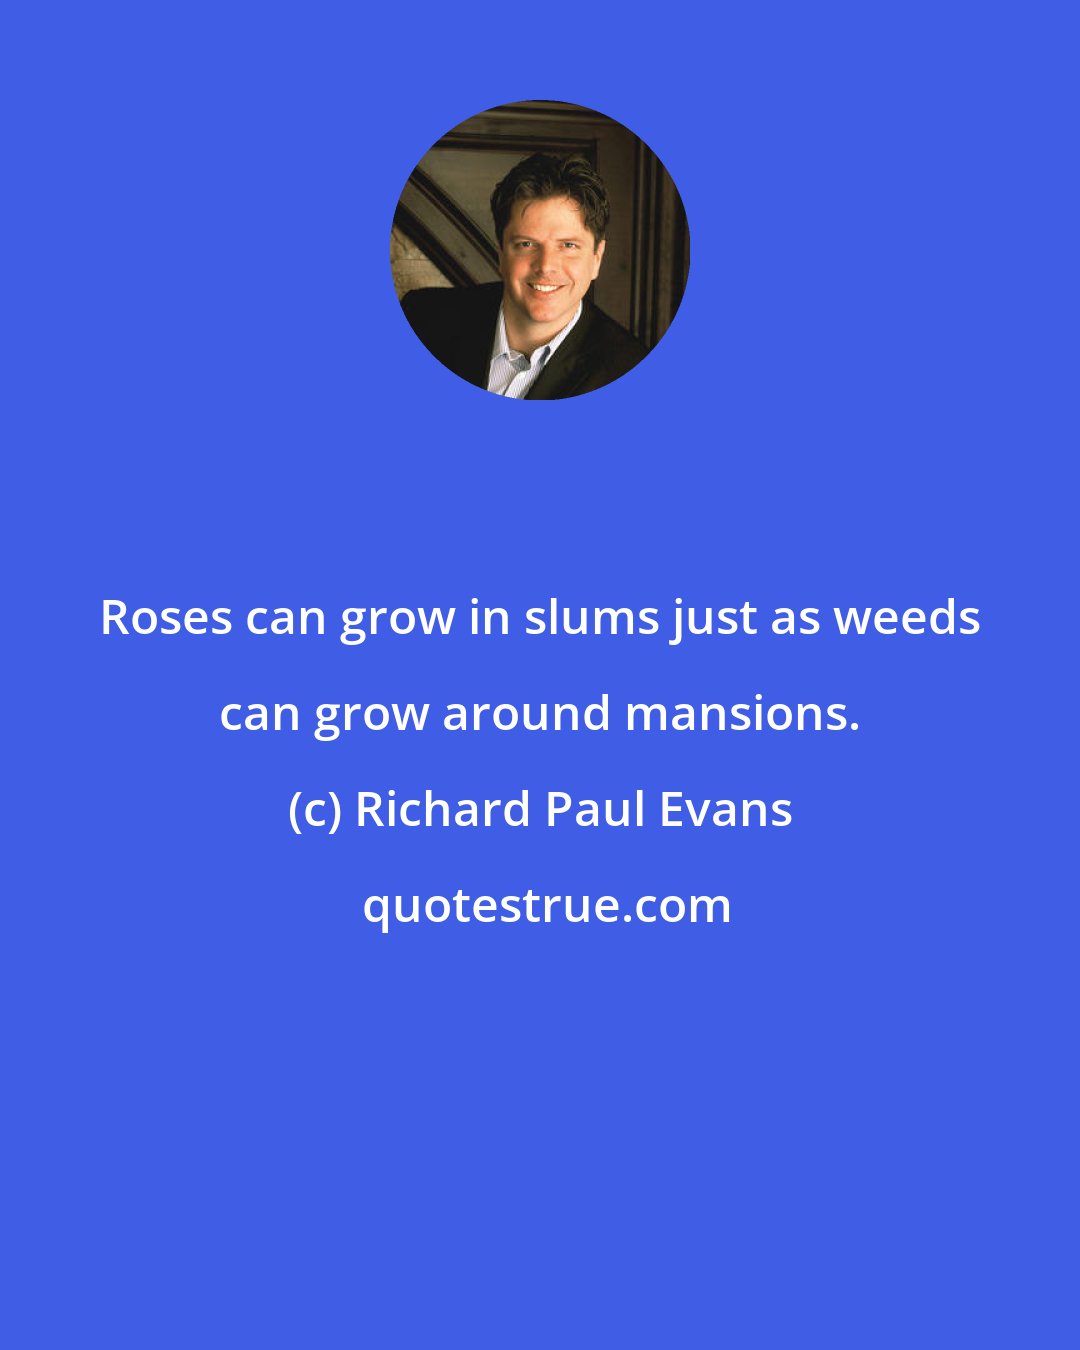 Richard Paul Evans: Roses can grow in slums just as weeds can grow around mansions.